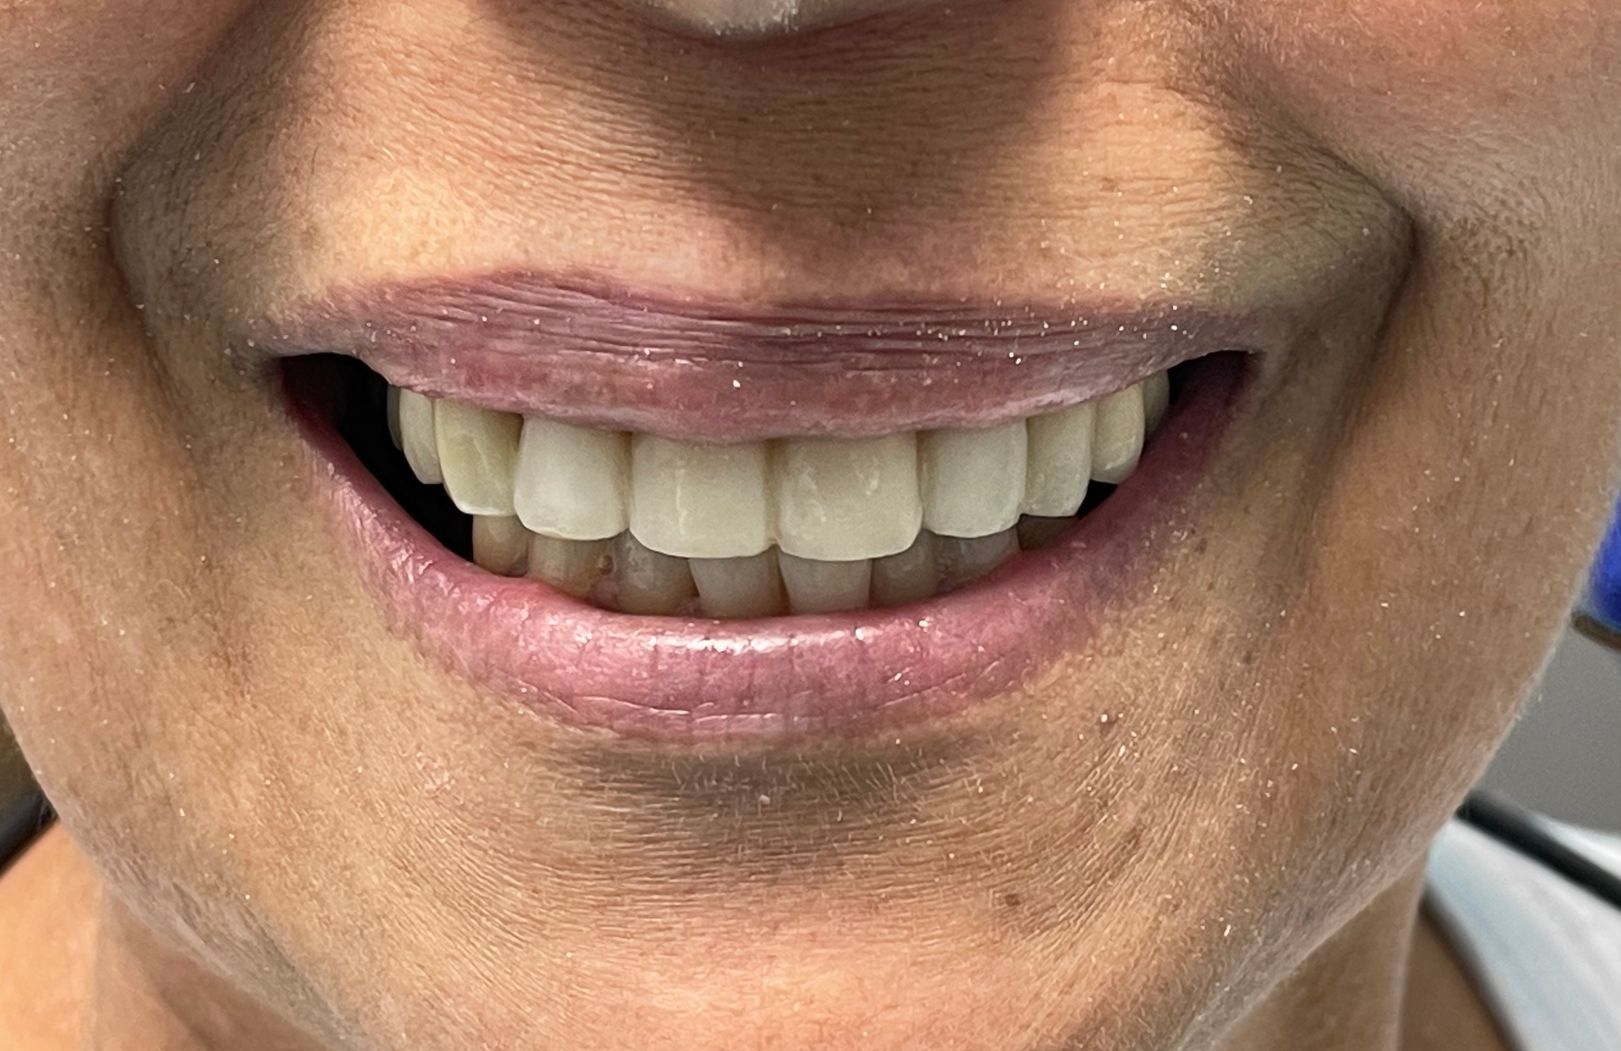 a close up of a woman 's smile with white teeth | Dental Crowns | Restoration and Smile makeover | Before and After Dental Treatment | Barclay Family Dental | Best Dentist For Family Dentistry, Dental Implants, and Cosmetic Dentistry in Cherry Hill, NJ